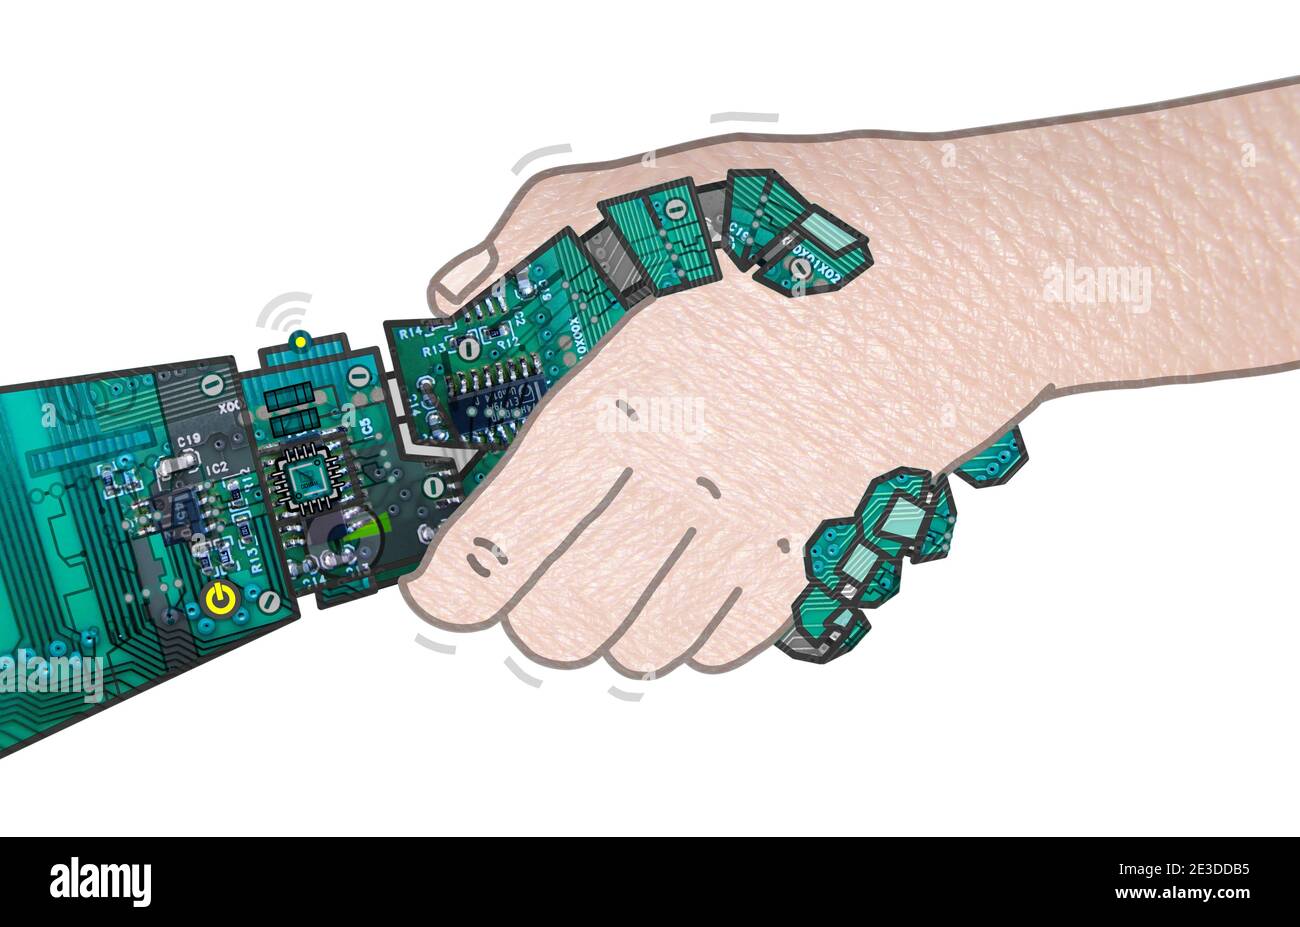 Hand drawn Robot and Human shaking Hands - collage Stock Photo